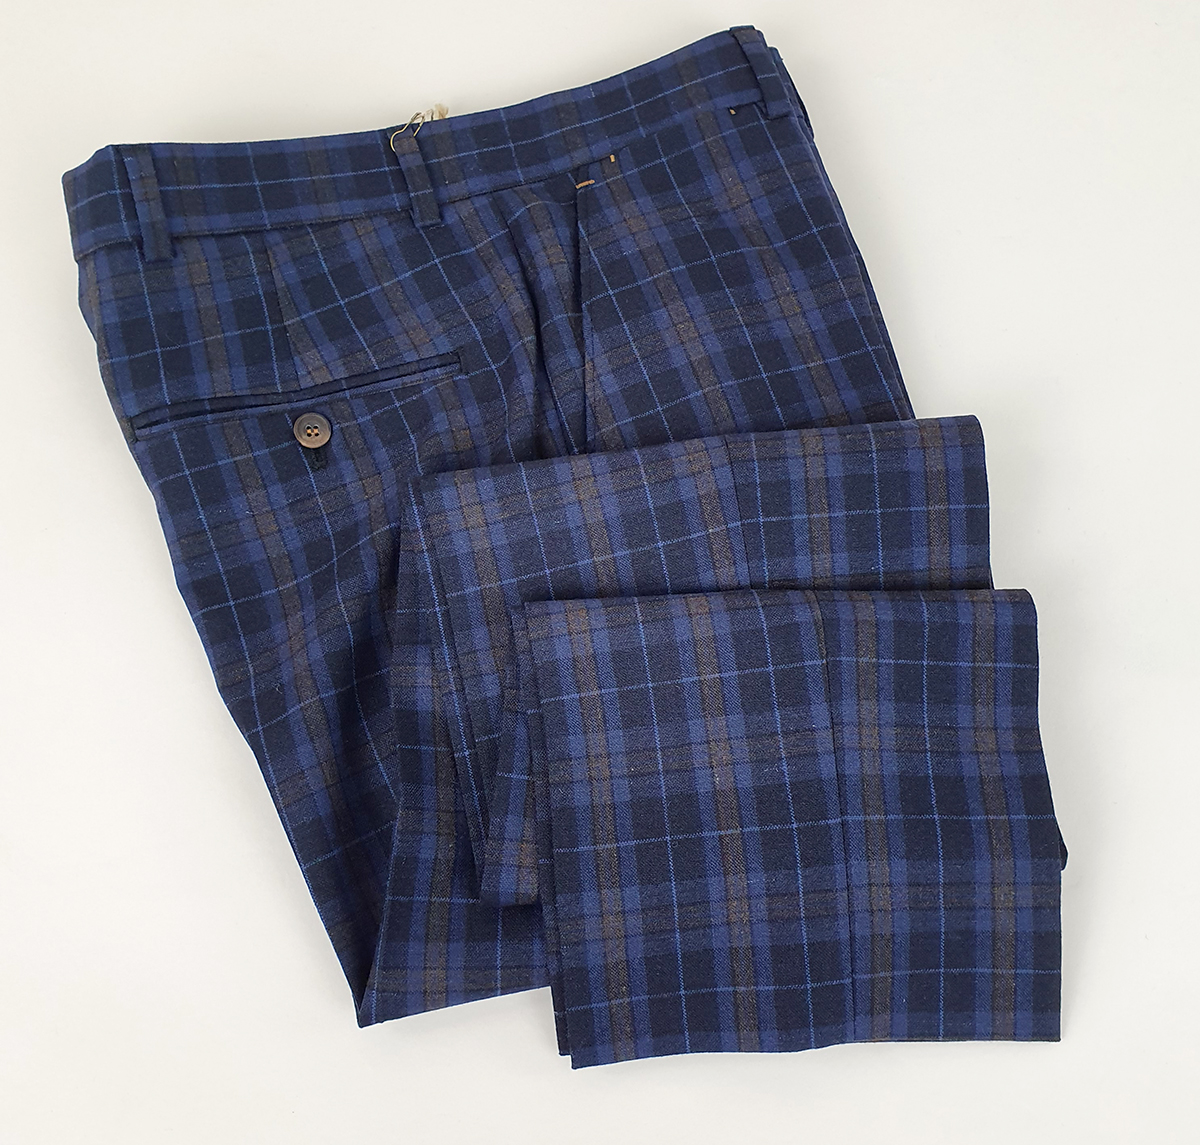 Mens Tartan Trousers Outfit  MacGregor and MacDuff